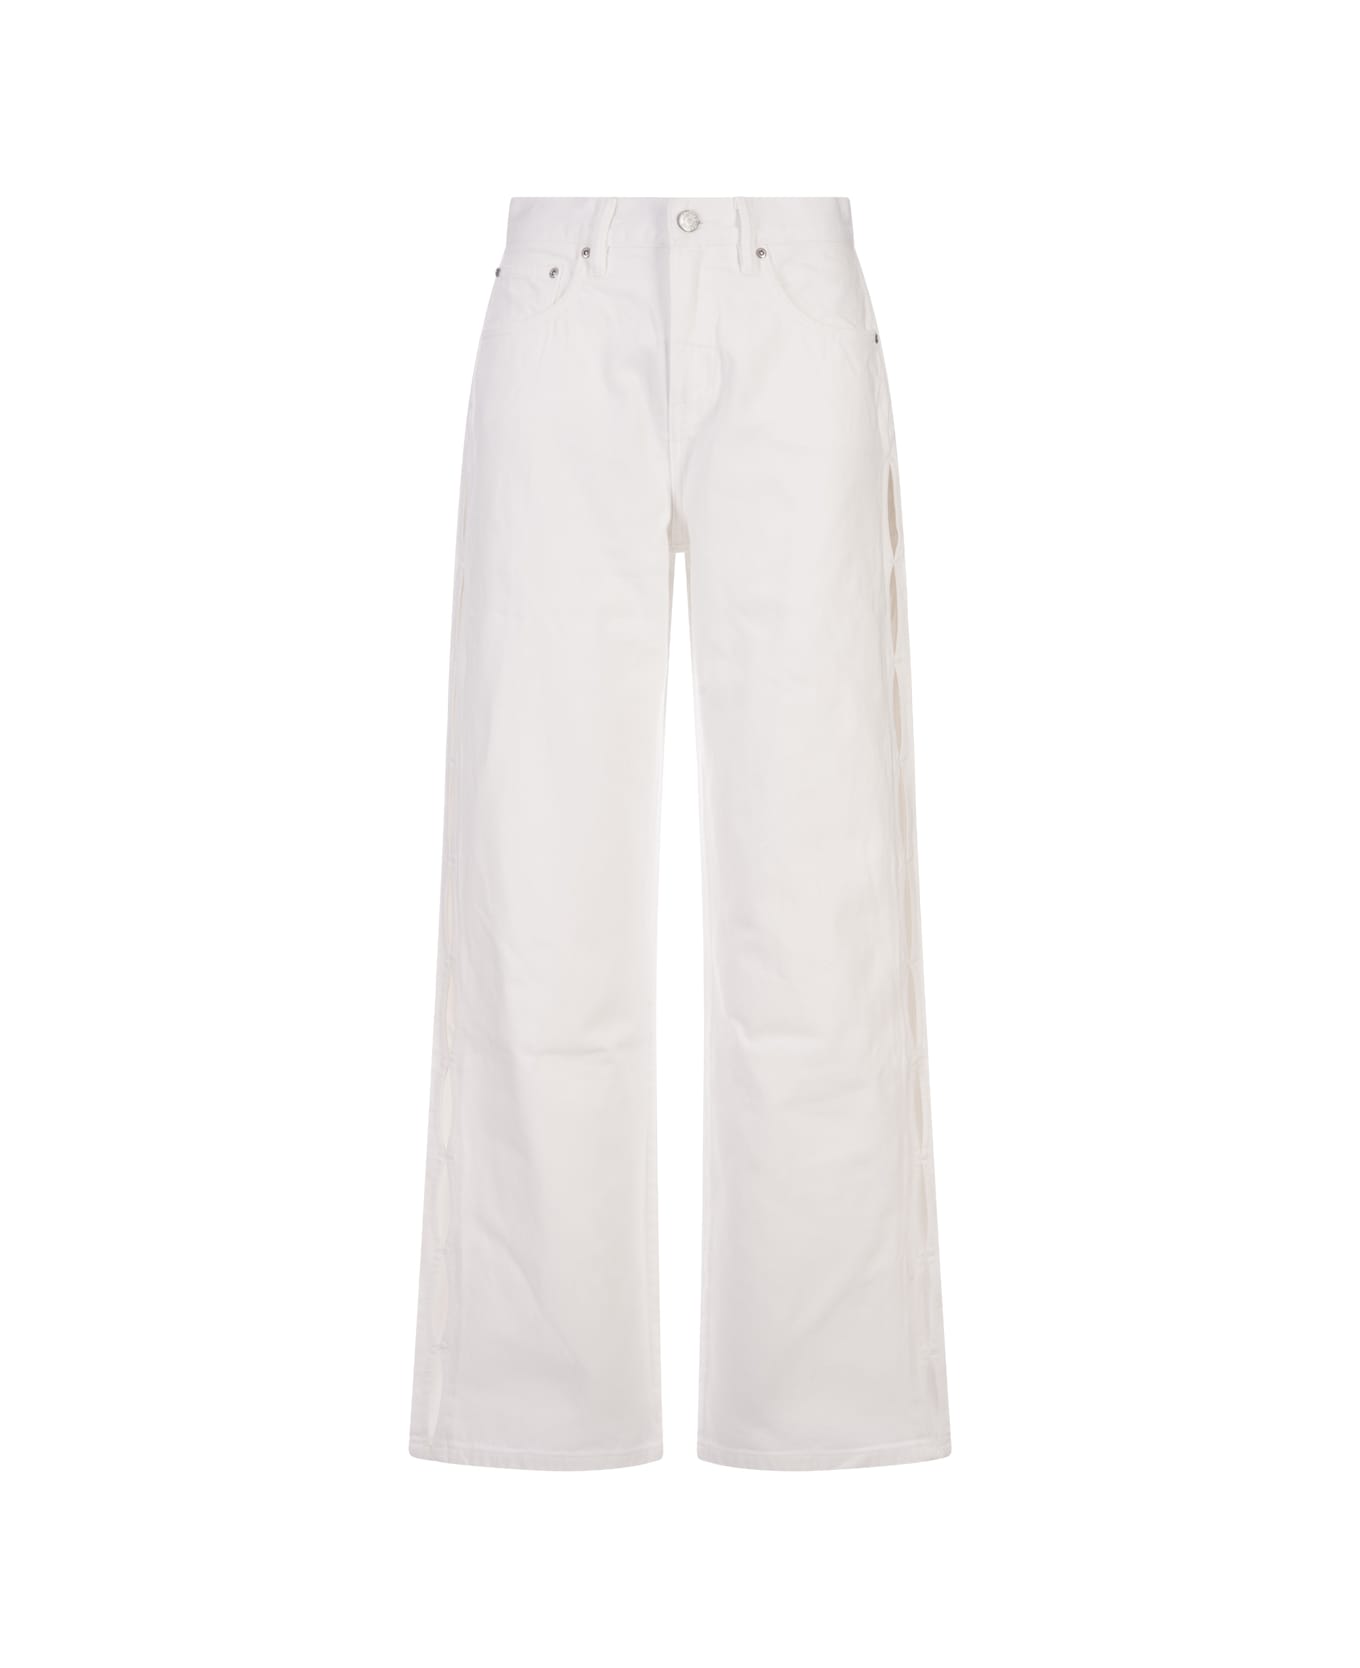 Purple Brand Wide Side Cut Out Jeans In White - White ボトムス